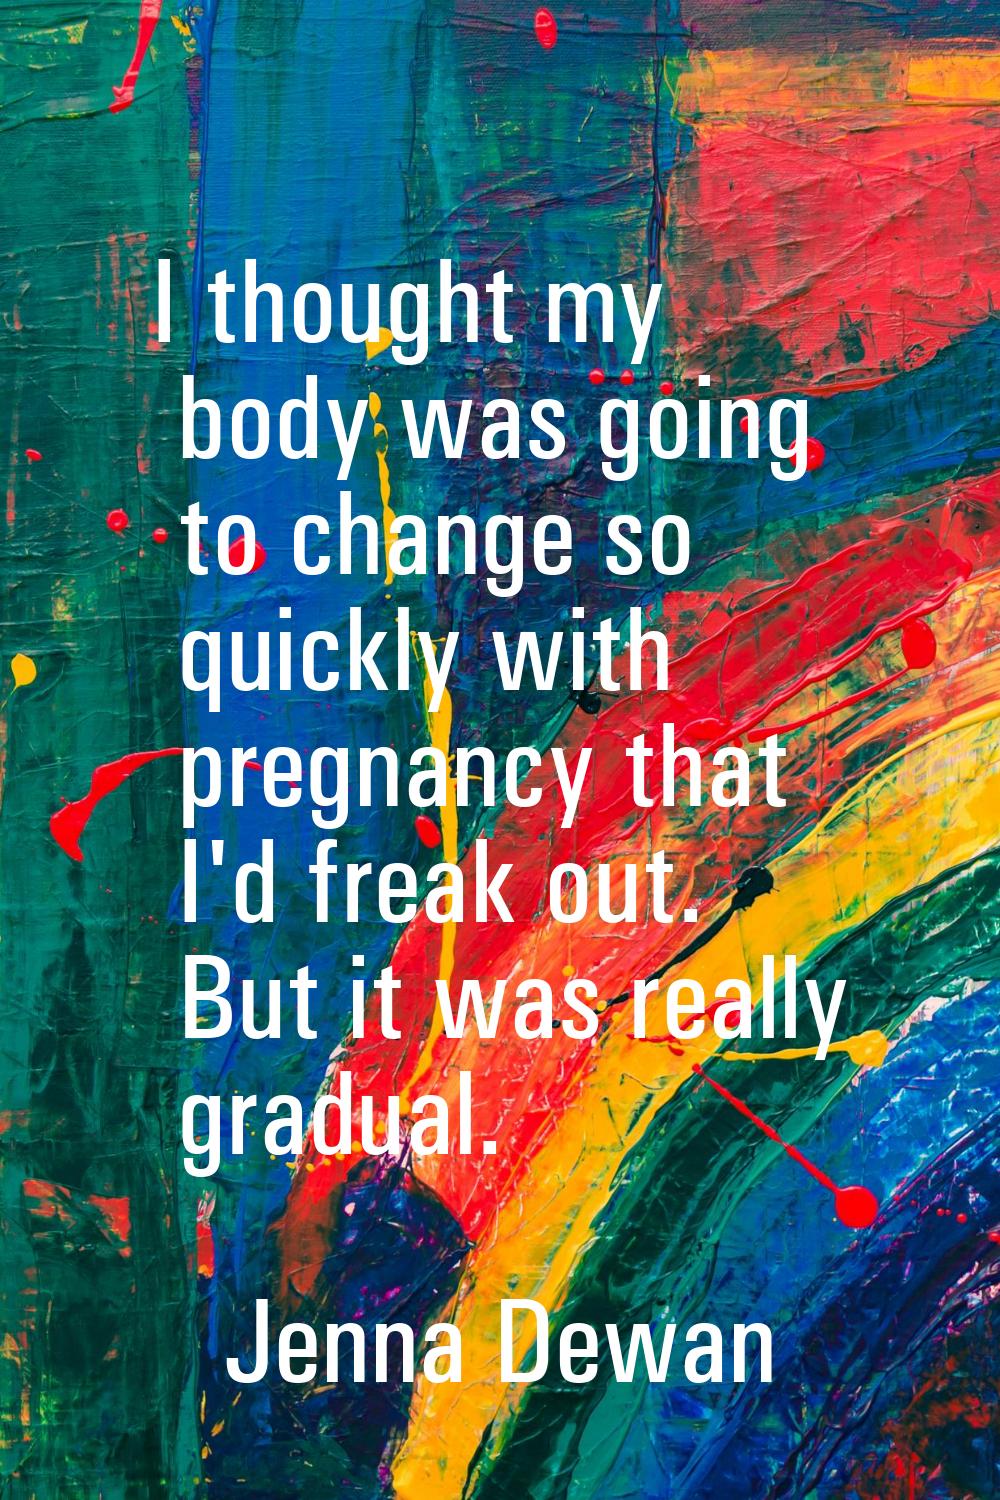 I thought my body was going to change so quickly with pregnancy that I'd freak out. But it was real